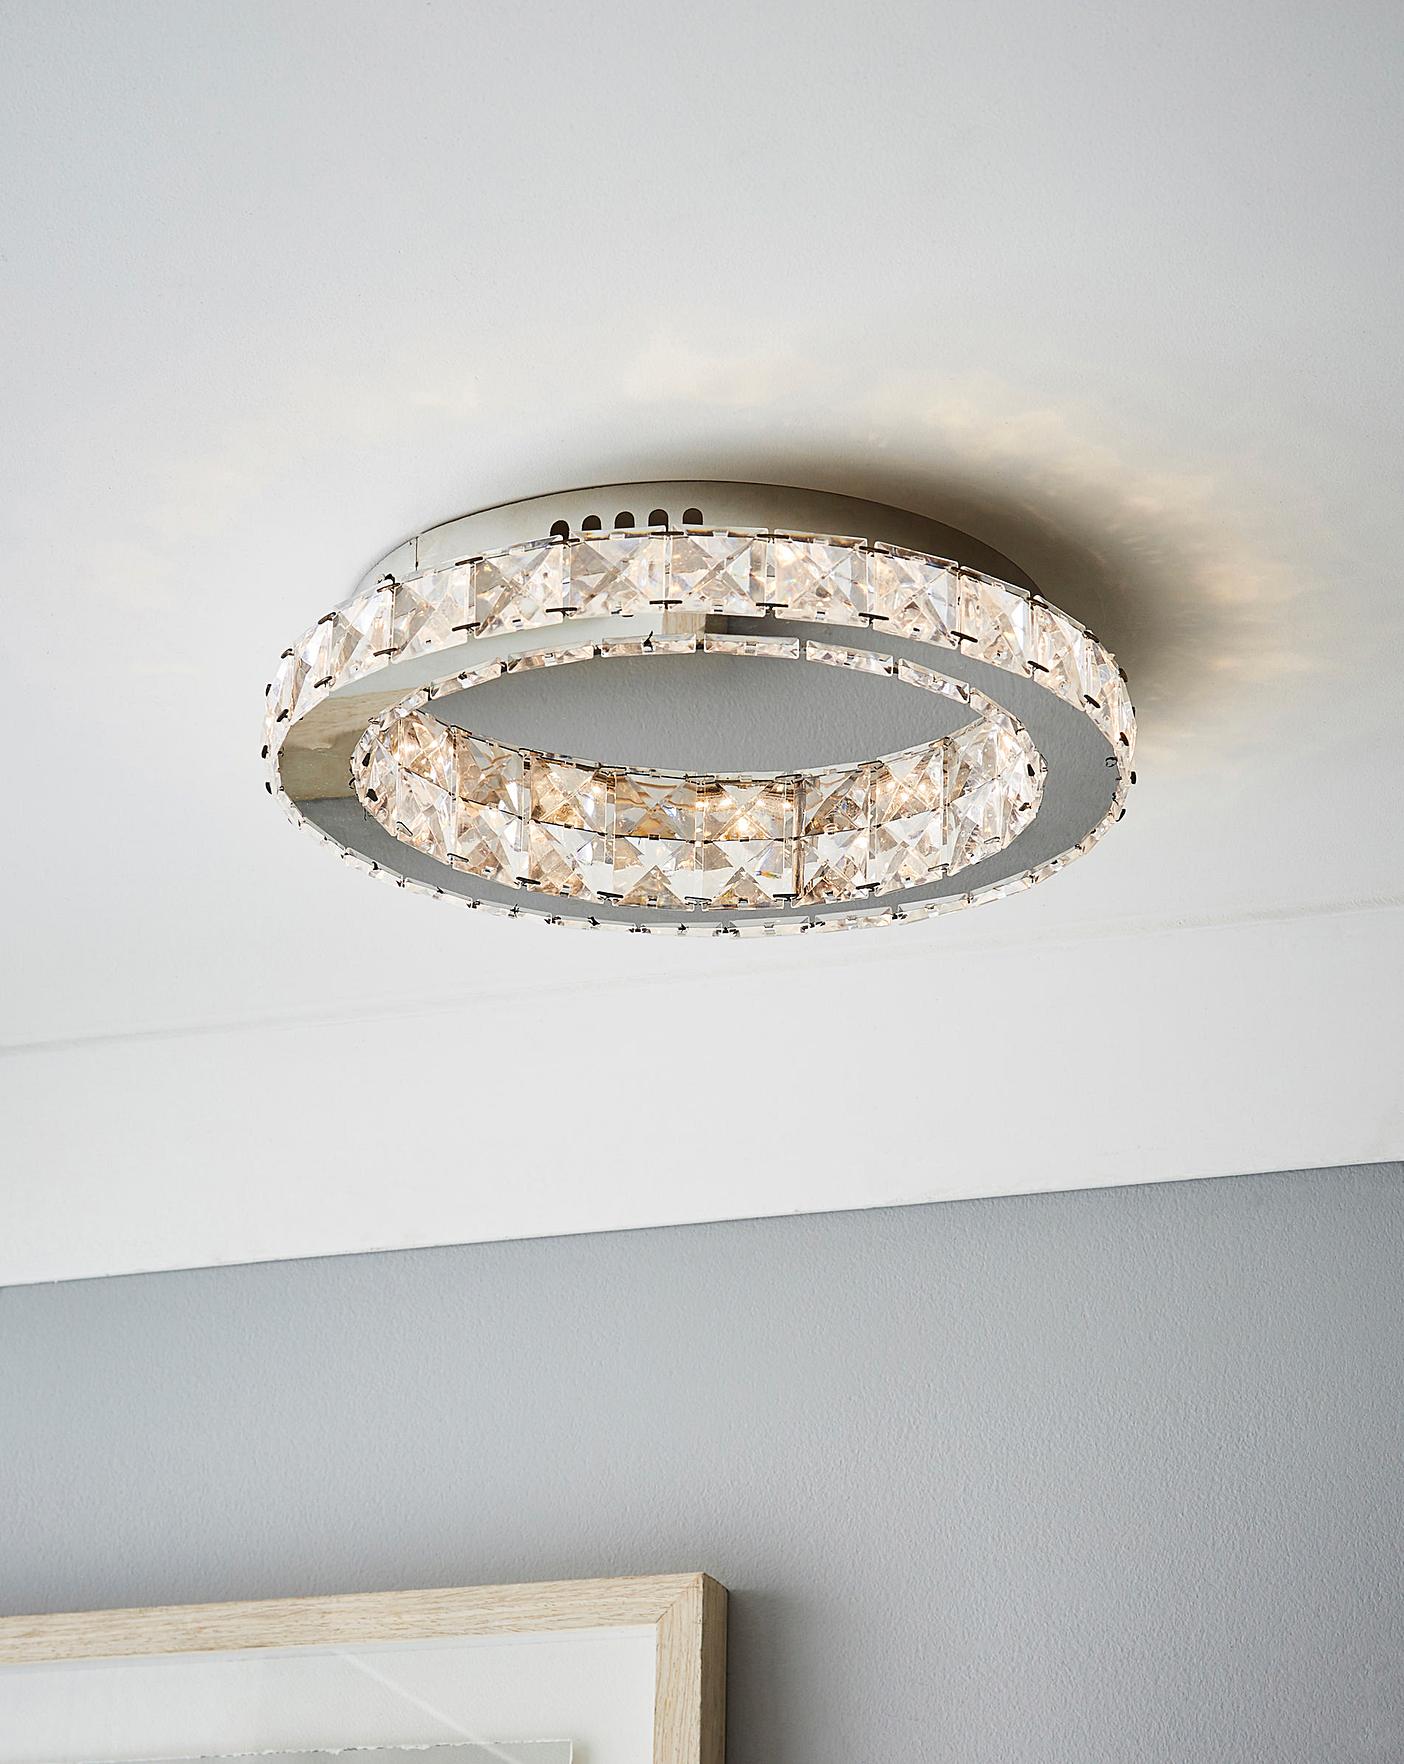 Leah Halo Fitted Ceiling Light